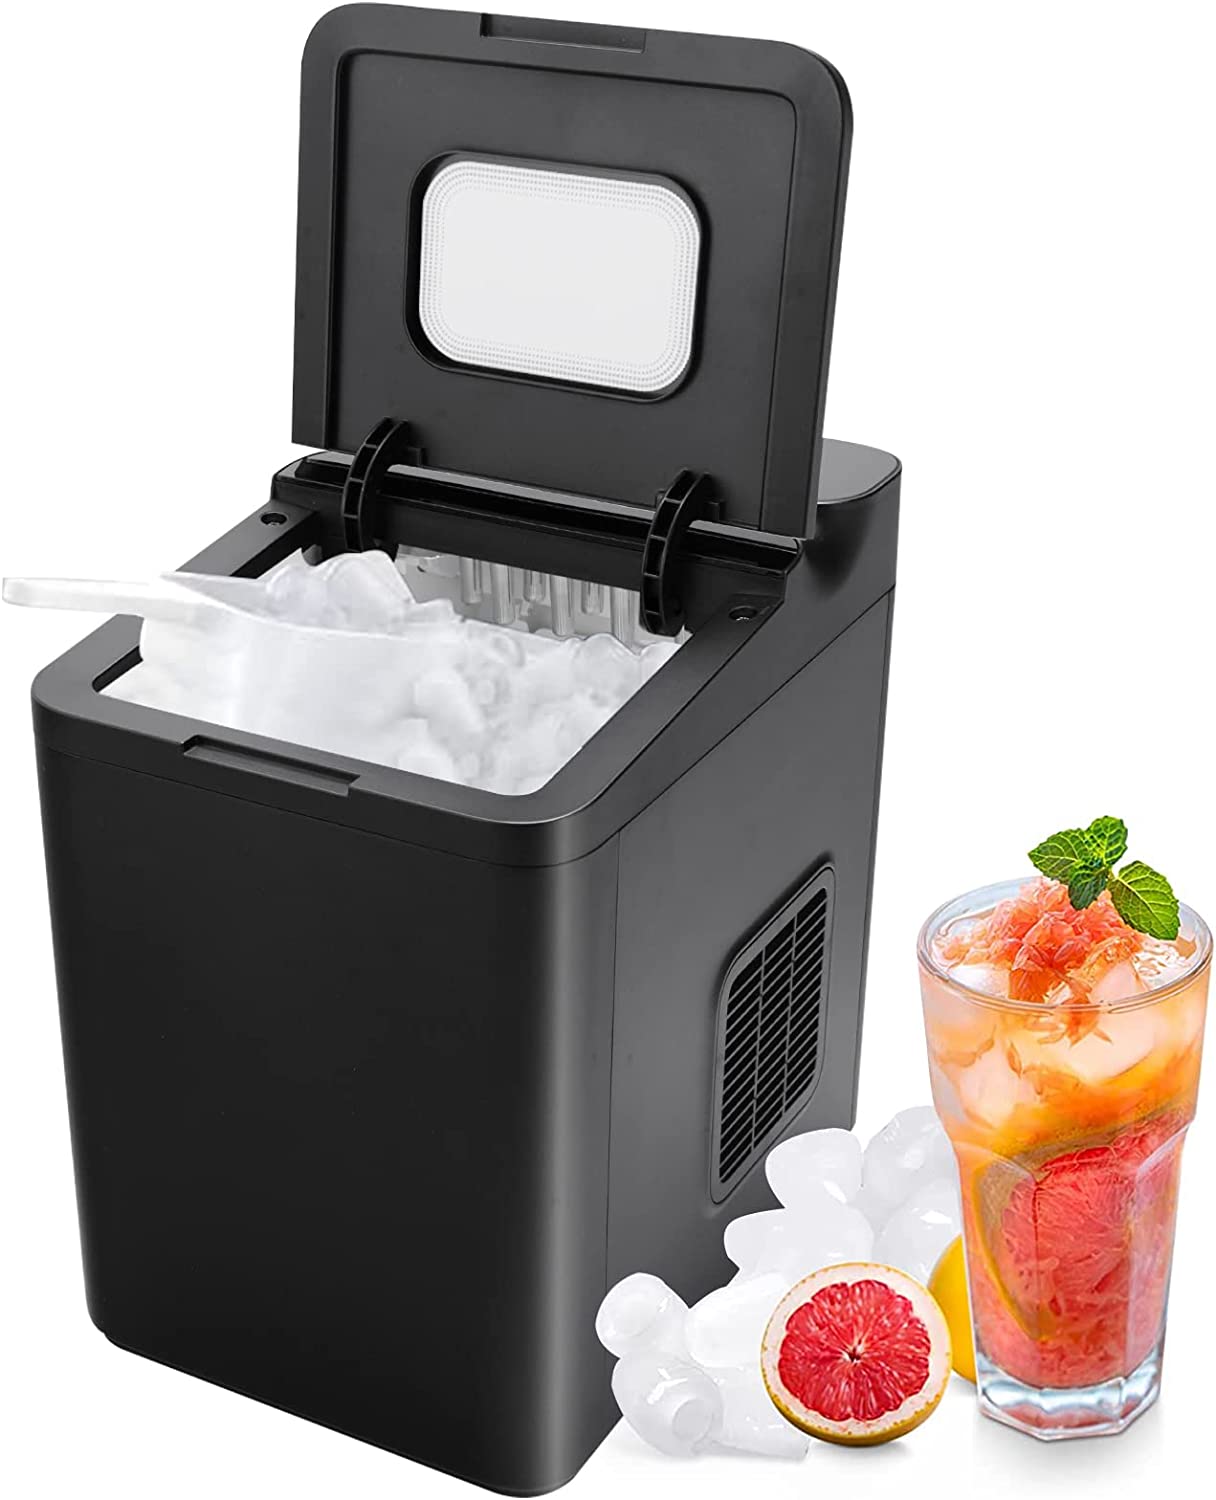 GOPLUS Electric Ice Cube Maker, Ice Maker, 12 kg/24 H, Portable Compact Ice Maker with Self-Cleaning, 9 Cubes in 6 Minutes, with Ice Basket & Shovel, LED Display & Touch Screen (Black)